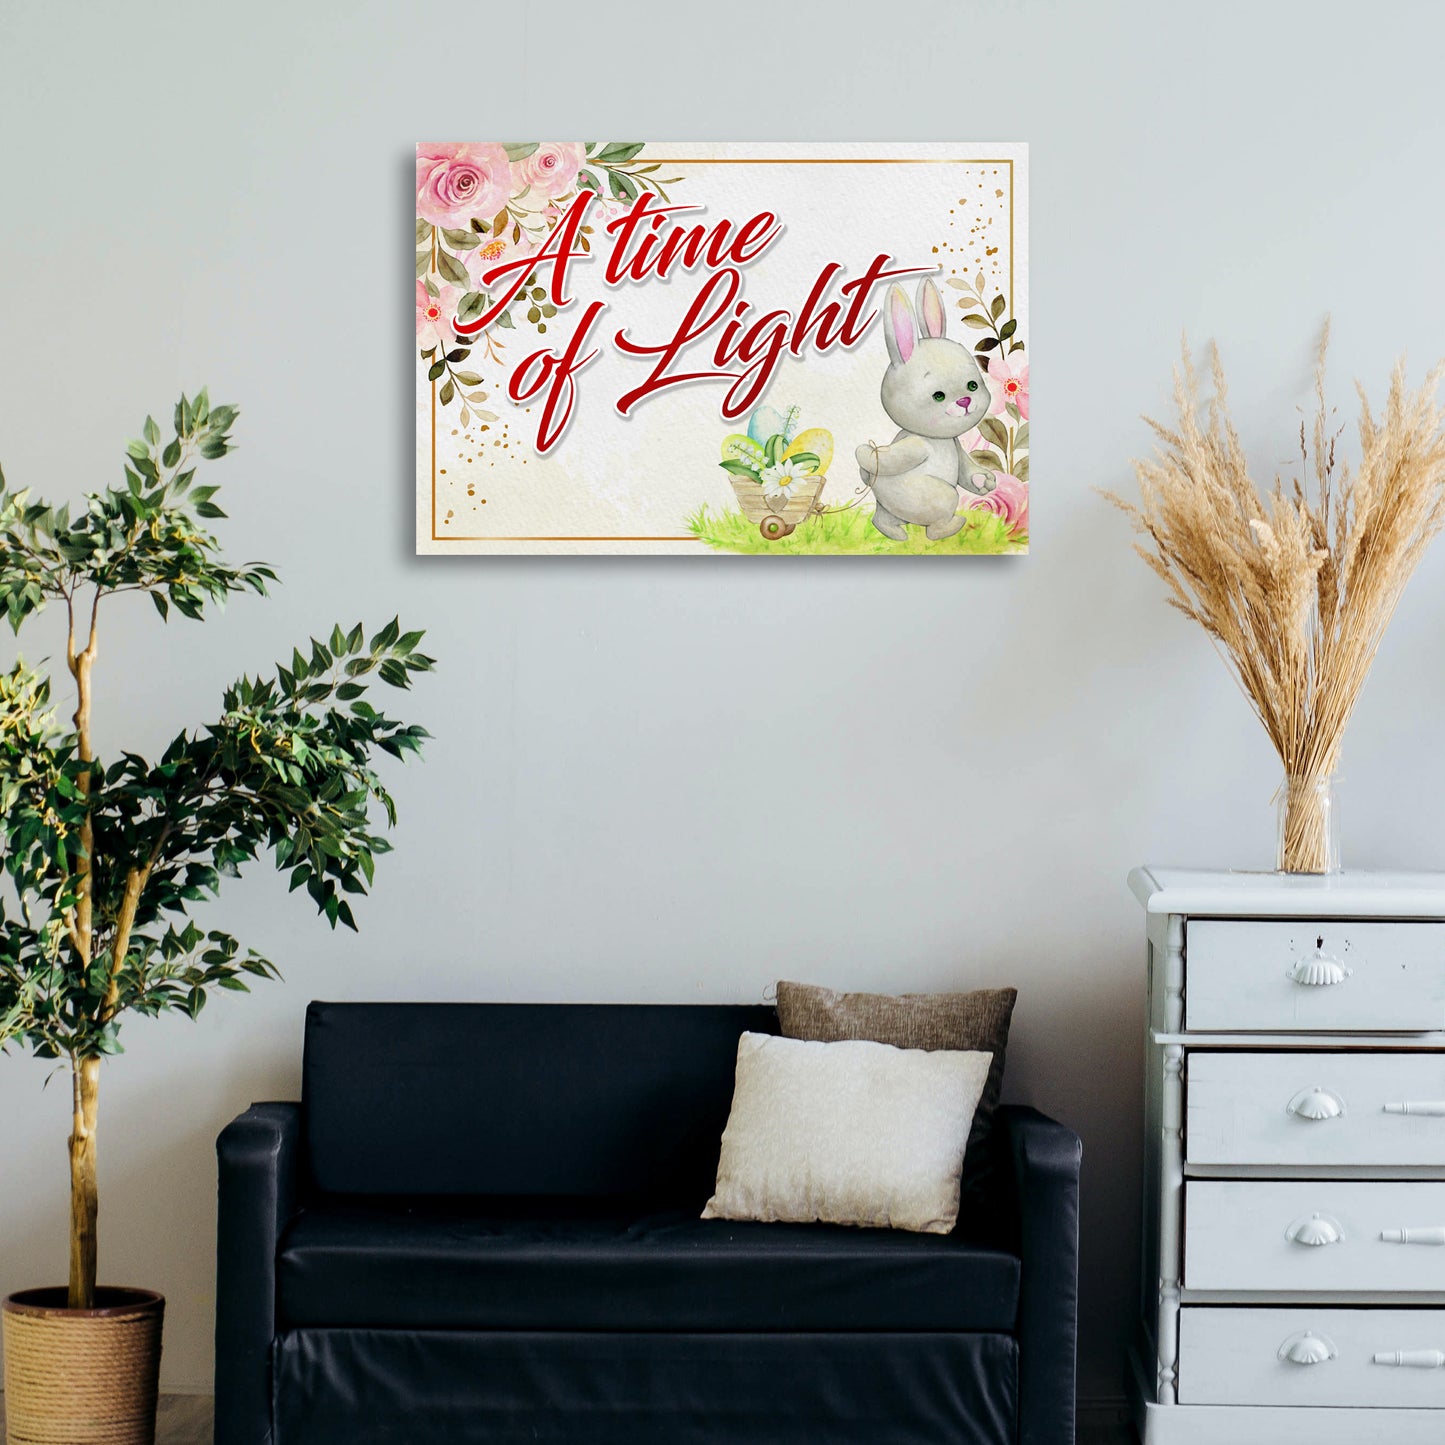 A Time Of Light Sign - Image by Tailored Canvases